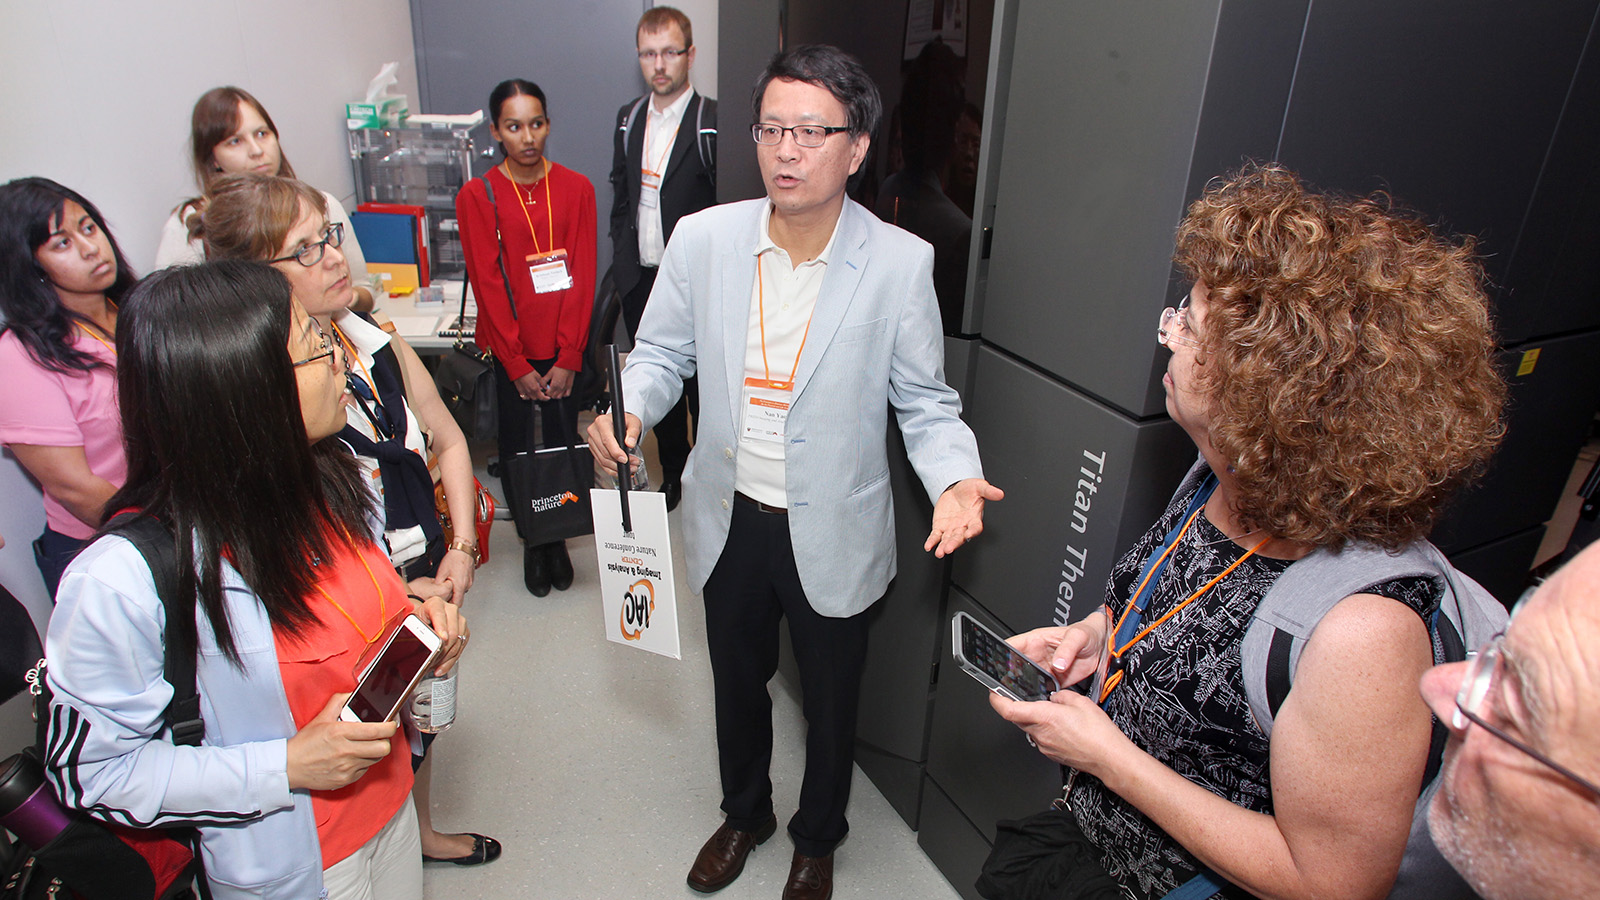 Director of microscopy facility gives tour to visiting researchers